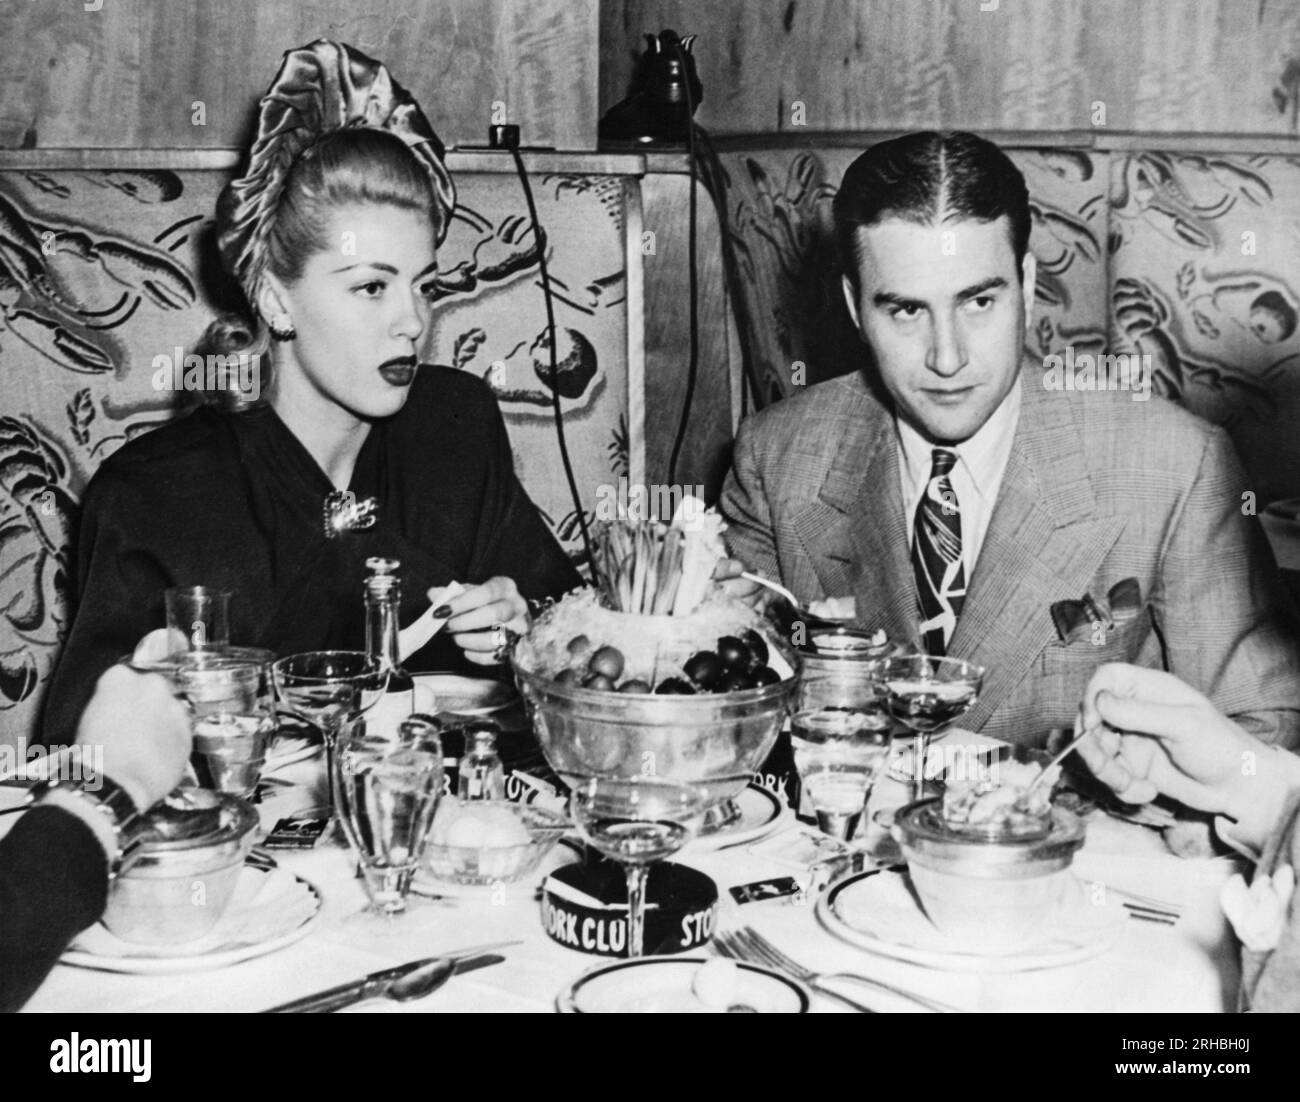 New York, New York:  November 14, 1941 Actress Lana Turner and orchestra leader Artie Shaw having dinner at the Stork Club. They are together for the first time since their divorce and are now planning their second marriage. Stock Photo